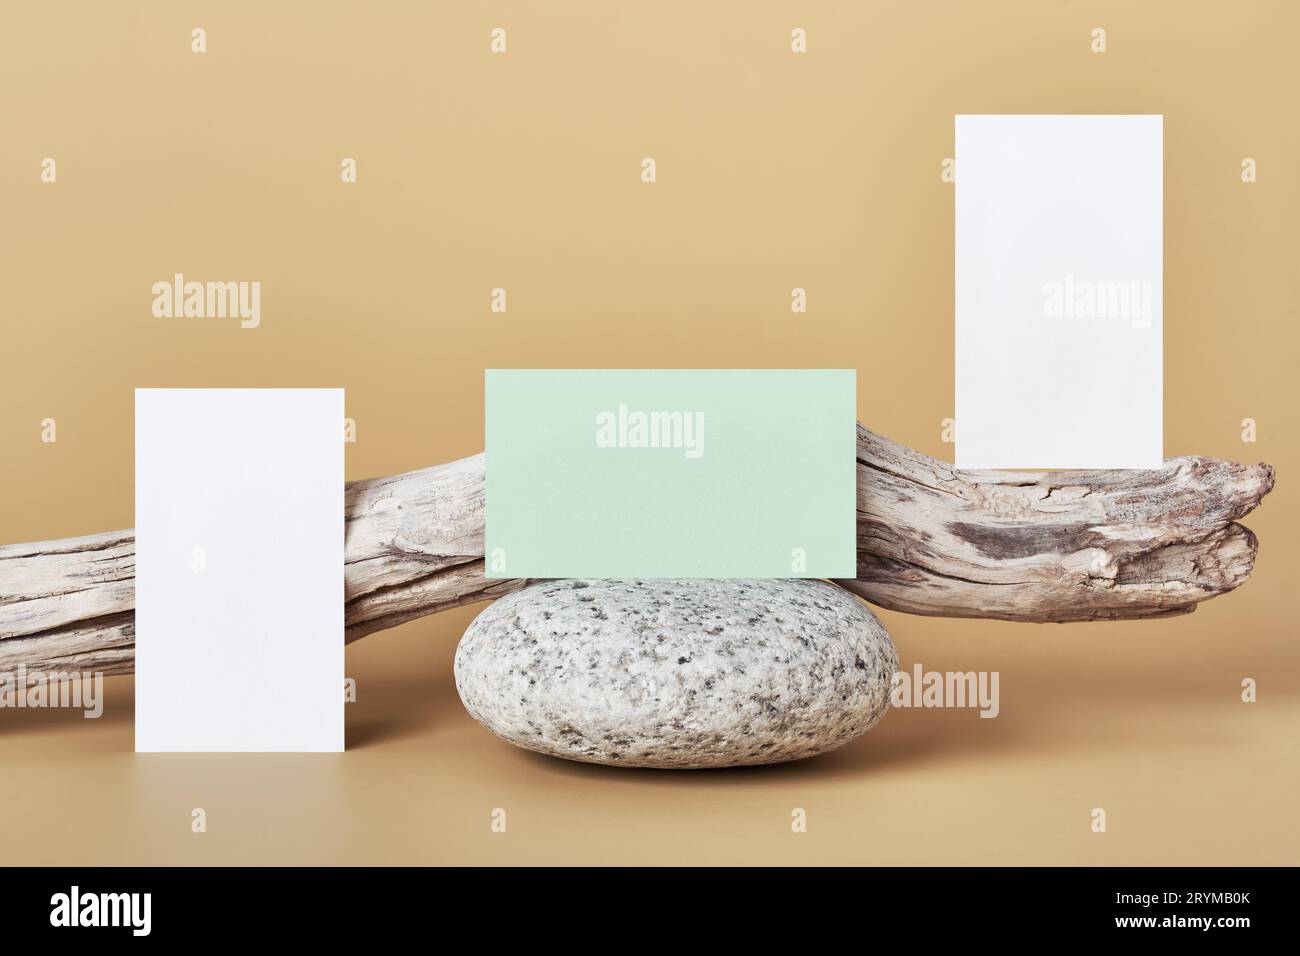 White and green paper business card mockup. Natural stone and driftwood on beige background Stock Photo